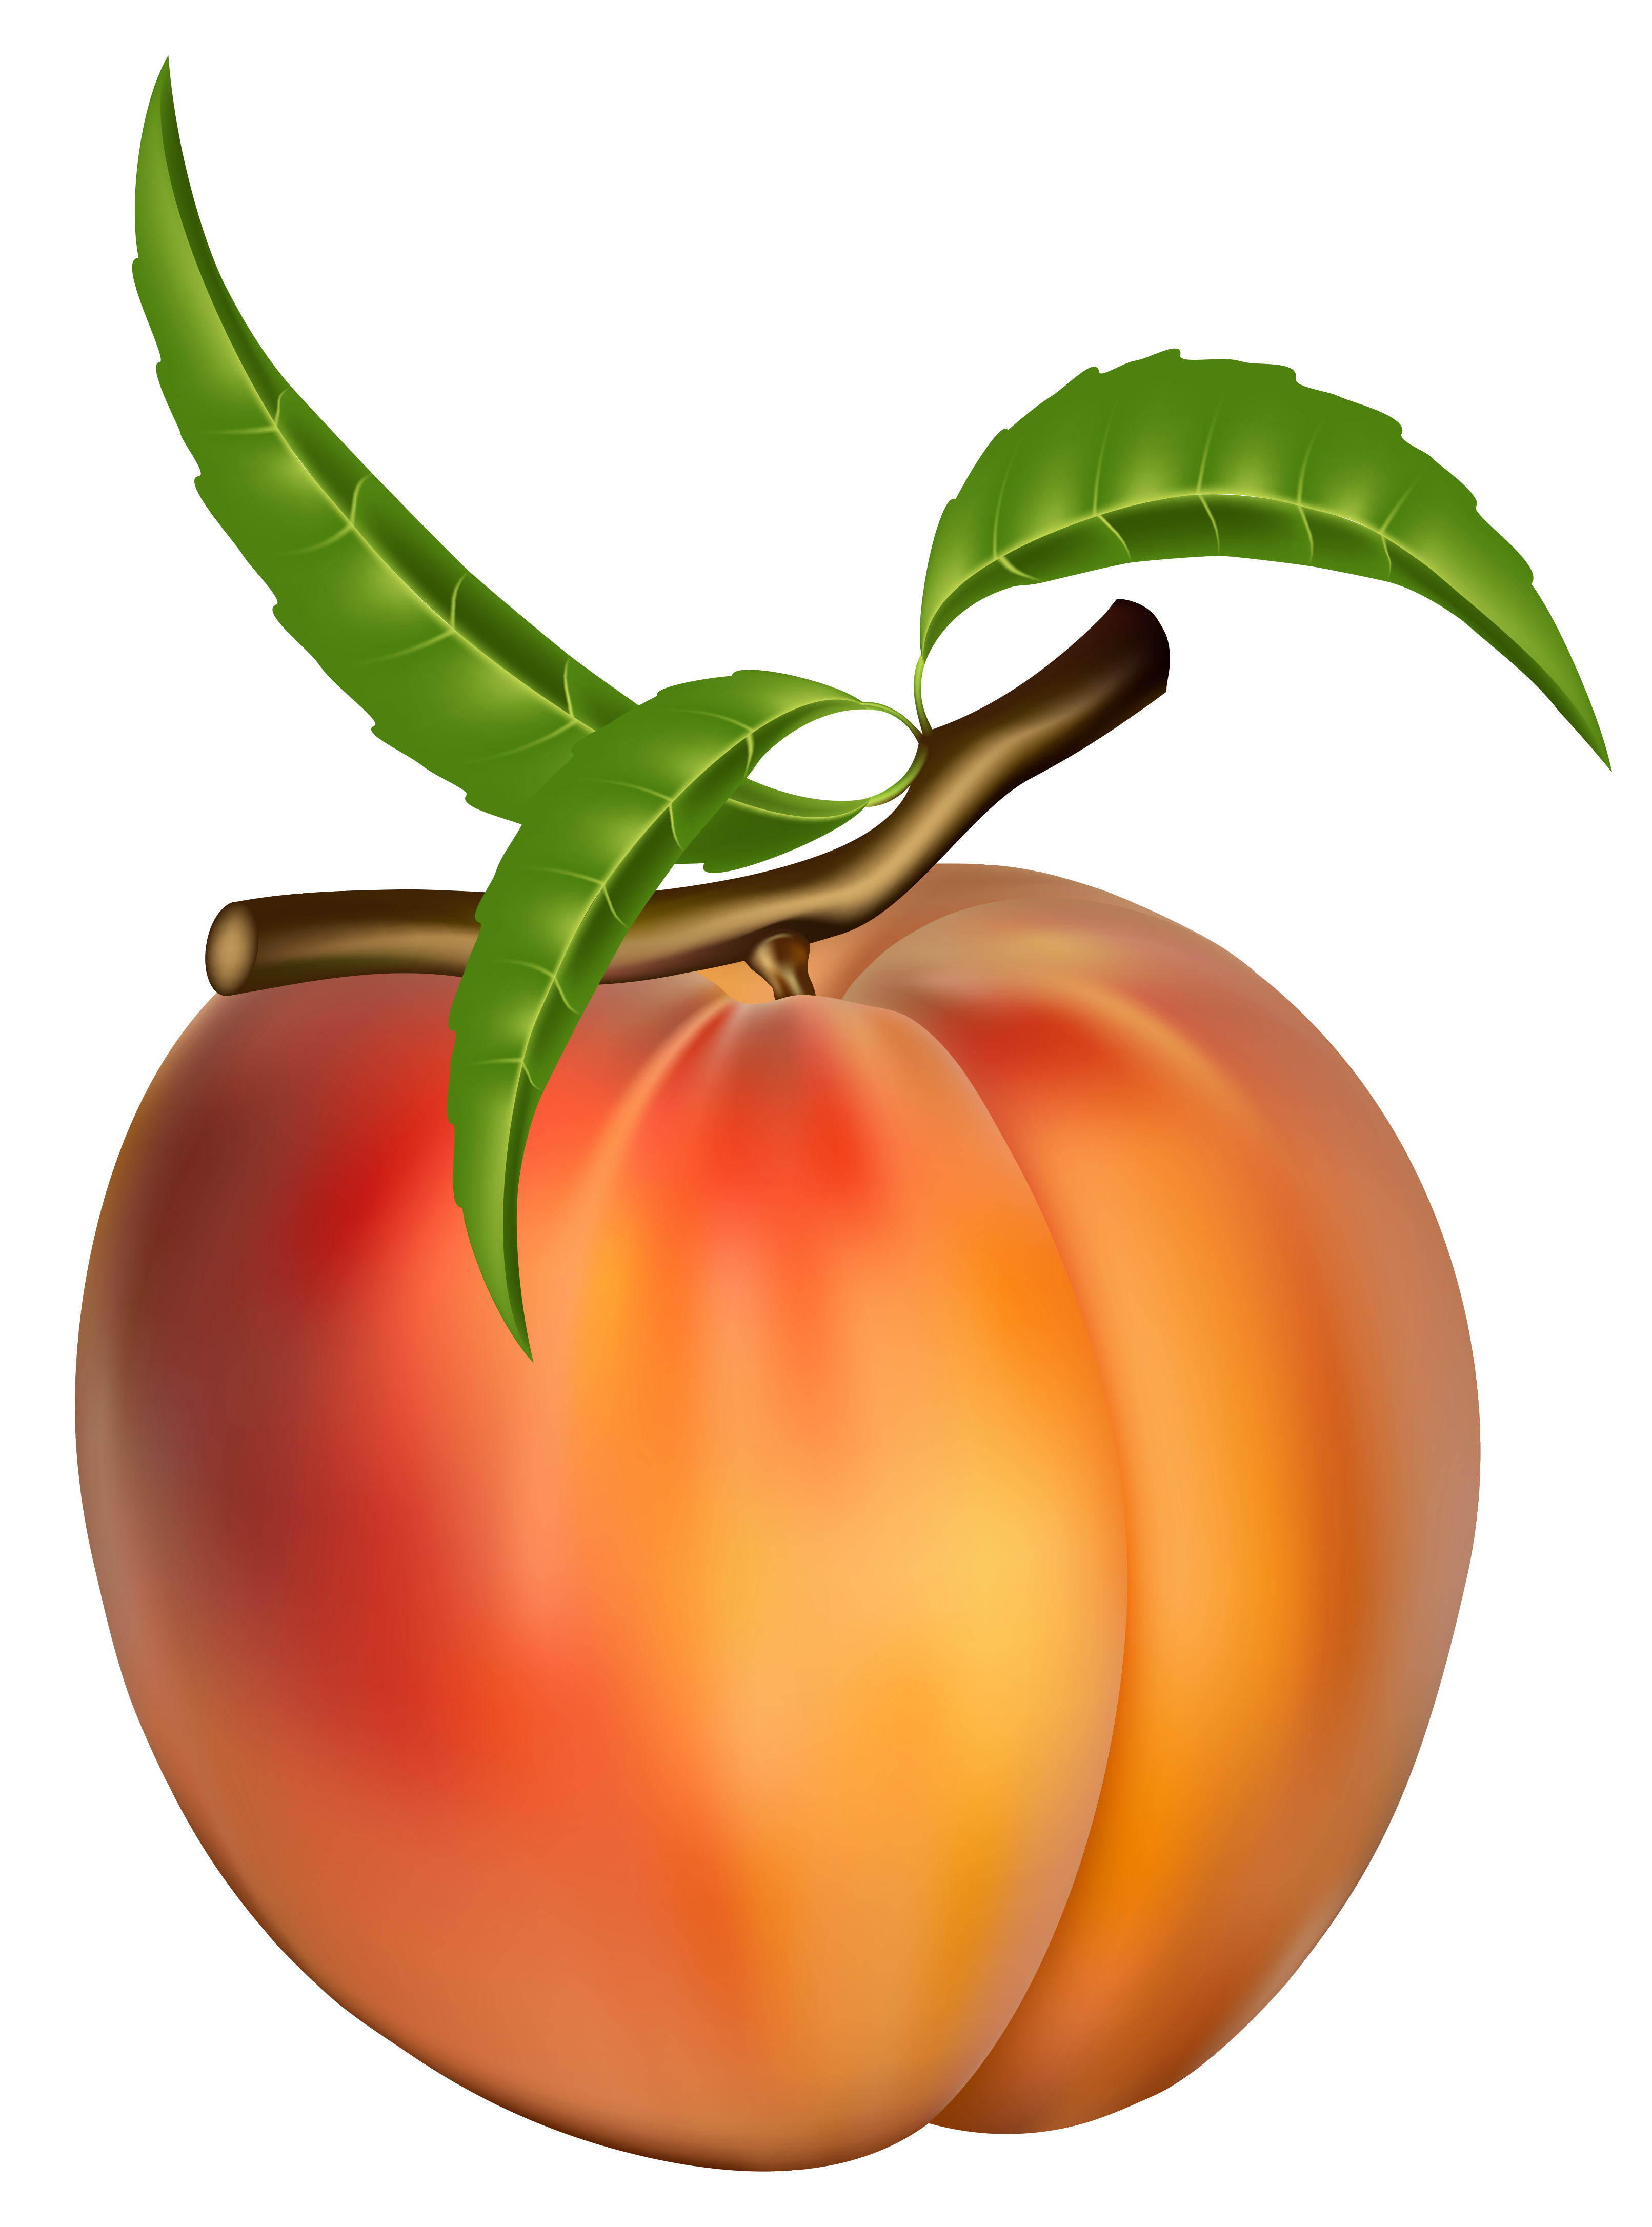 Peach free z lds. Clipart vegetables colored